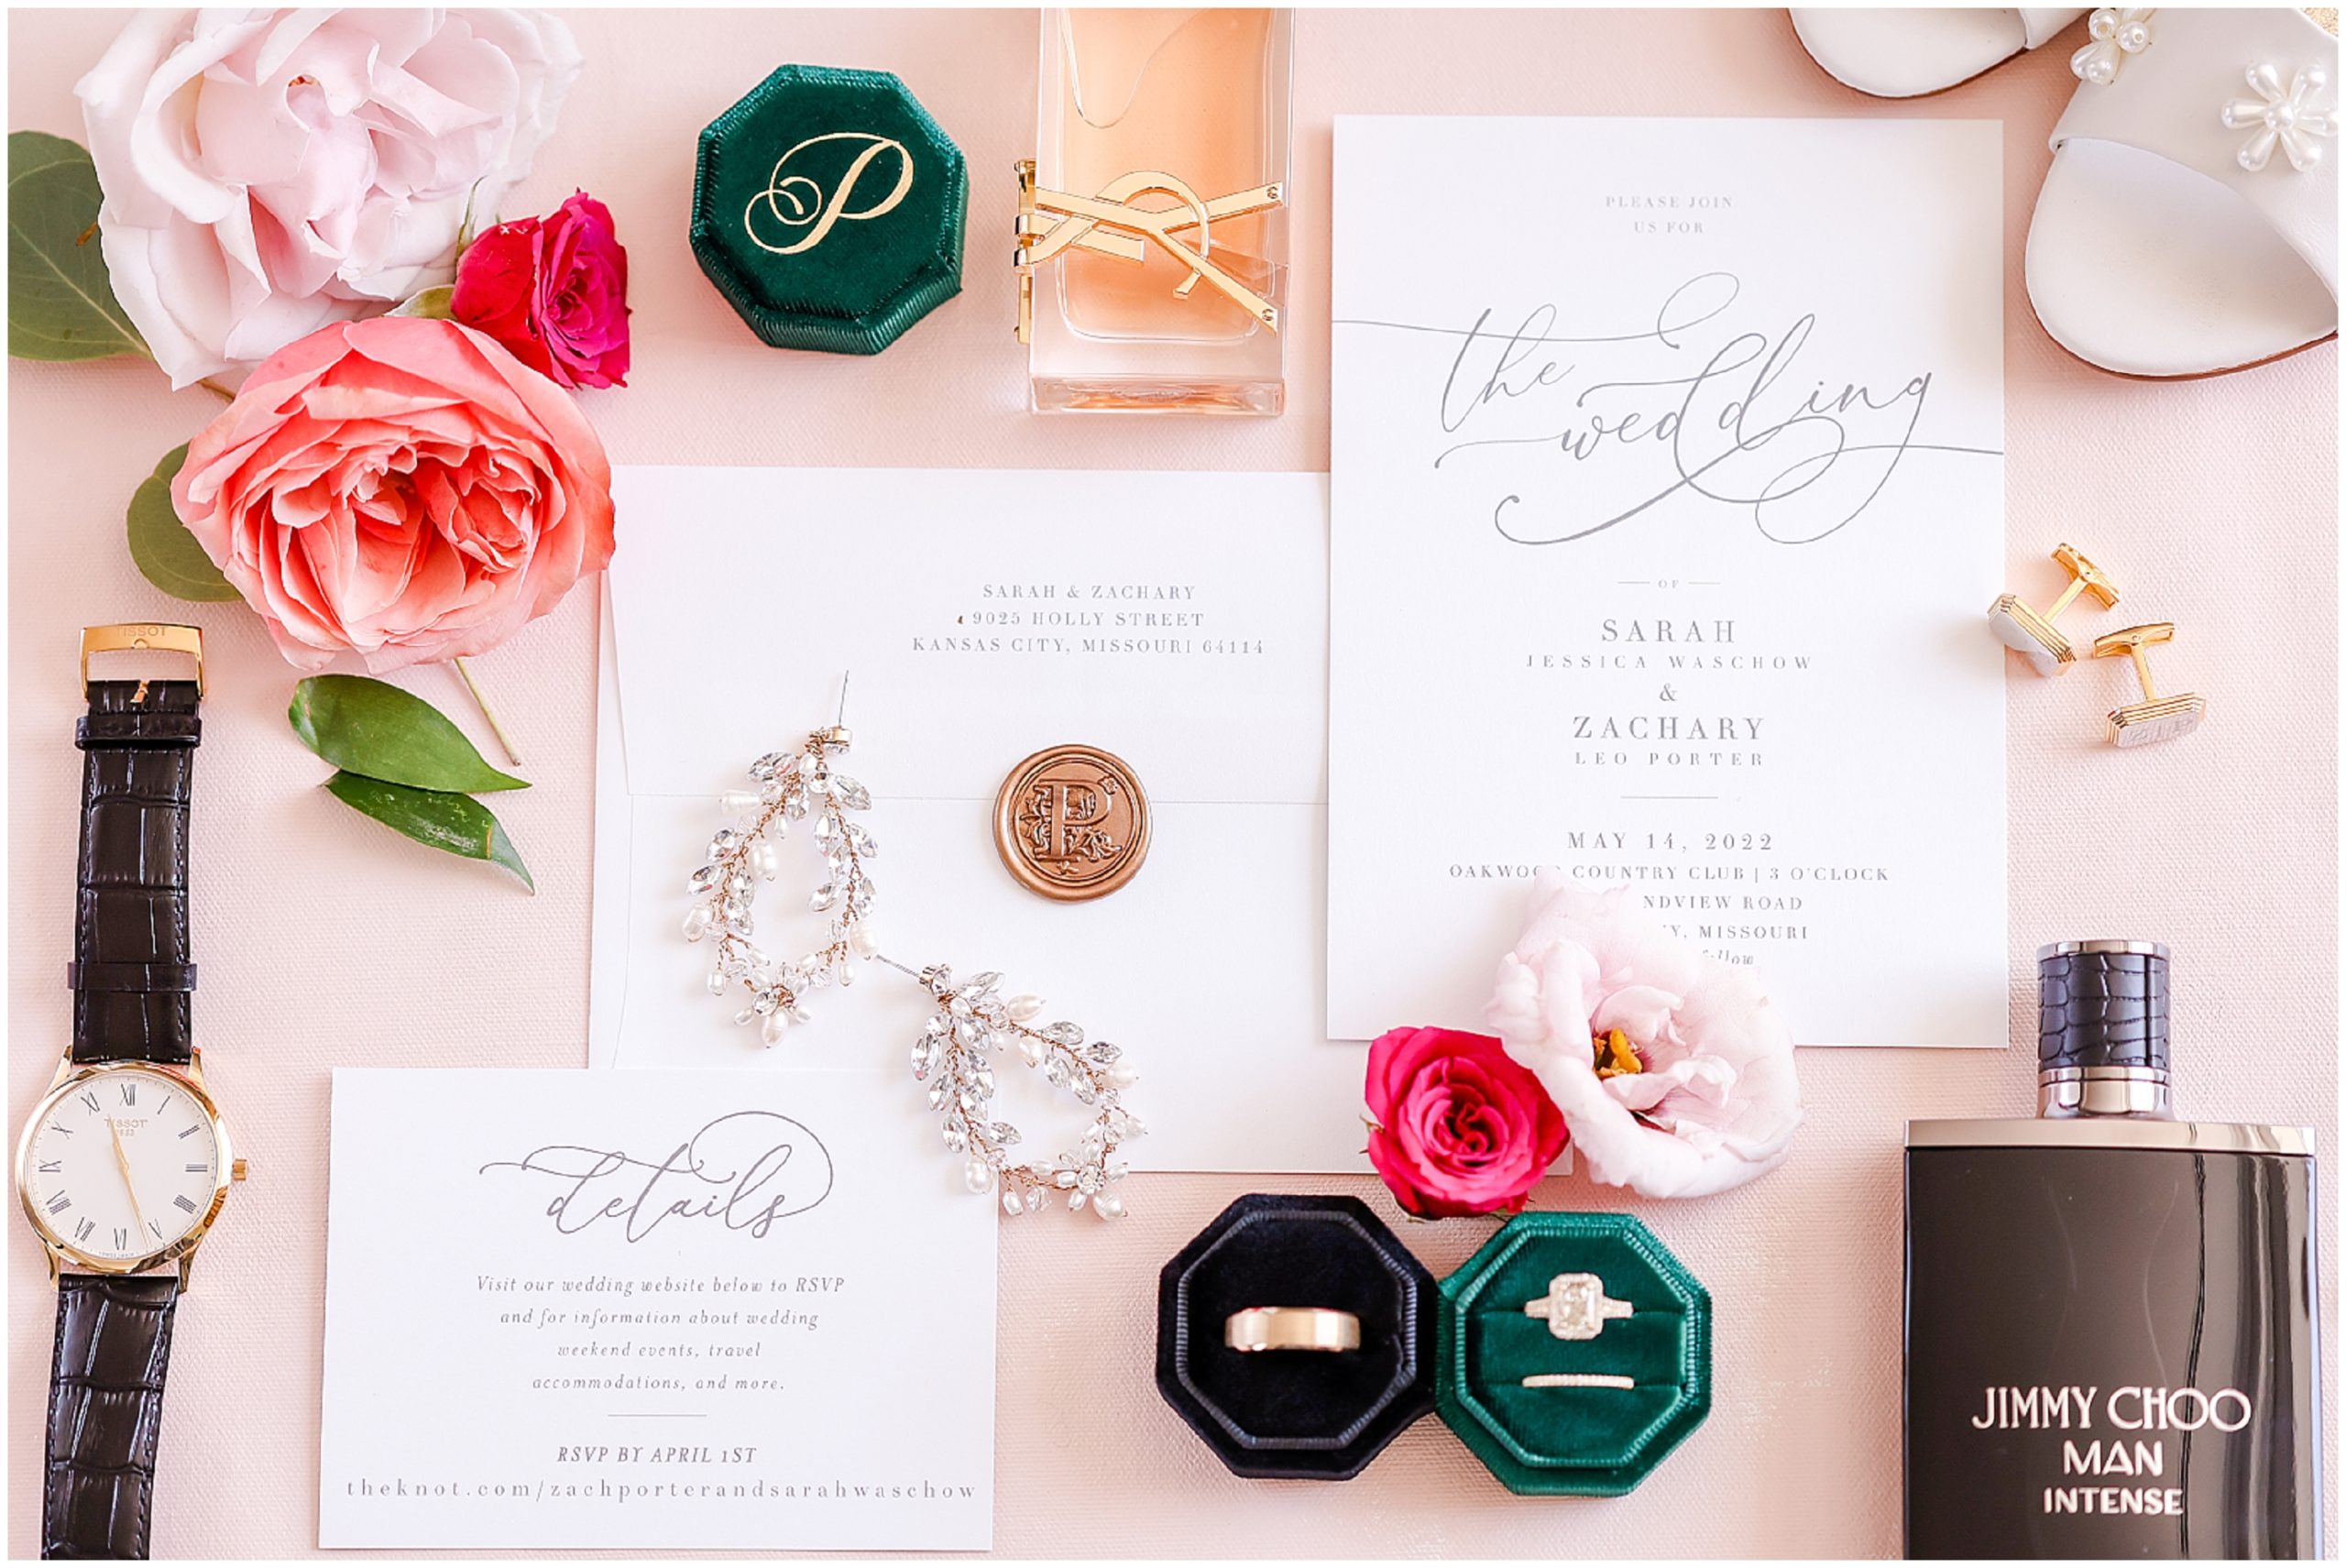 wedding invitations - mariam saifan photography - flatlay wedding details and why they are important